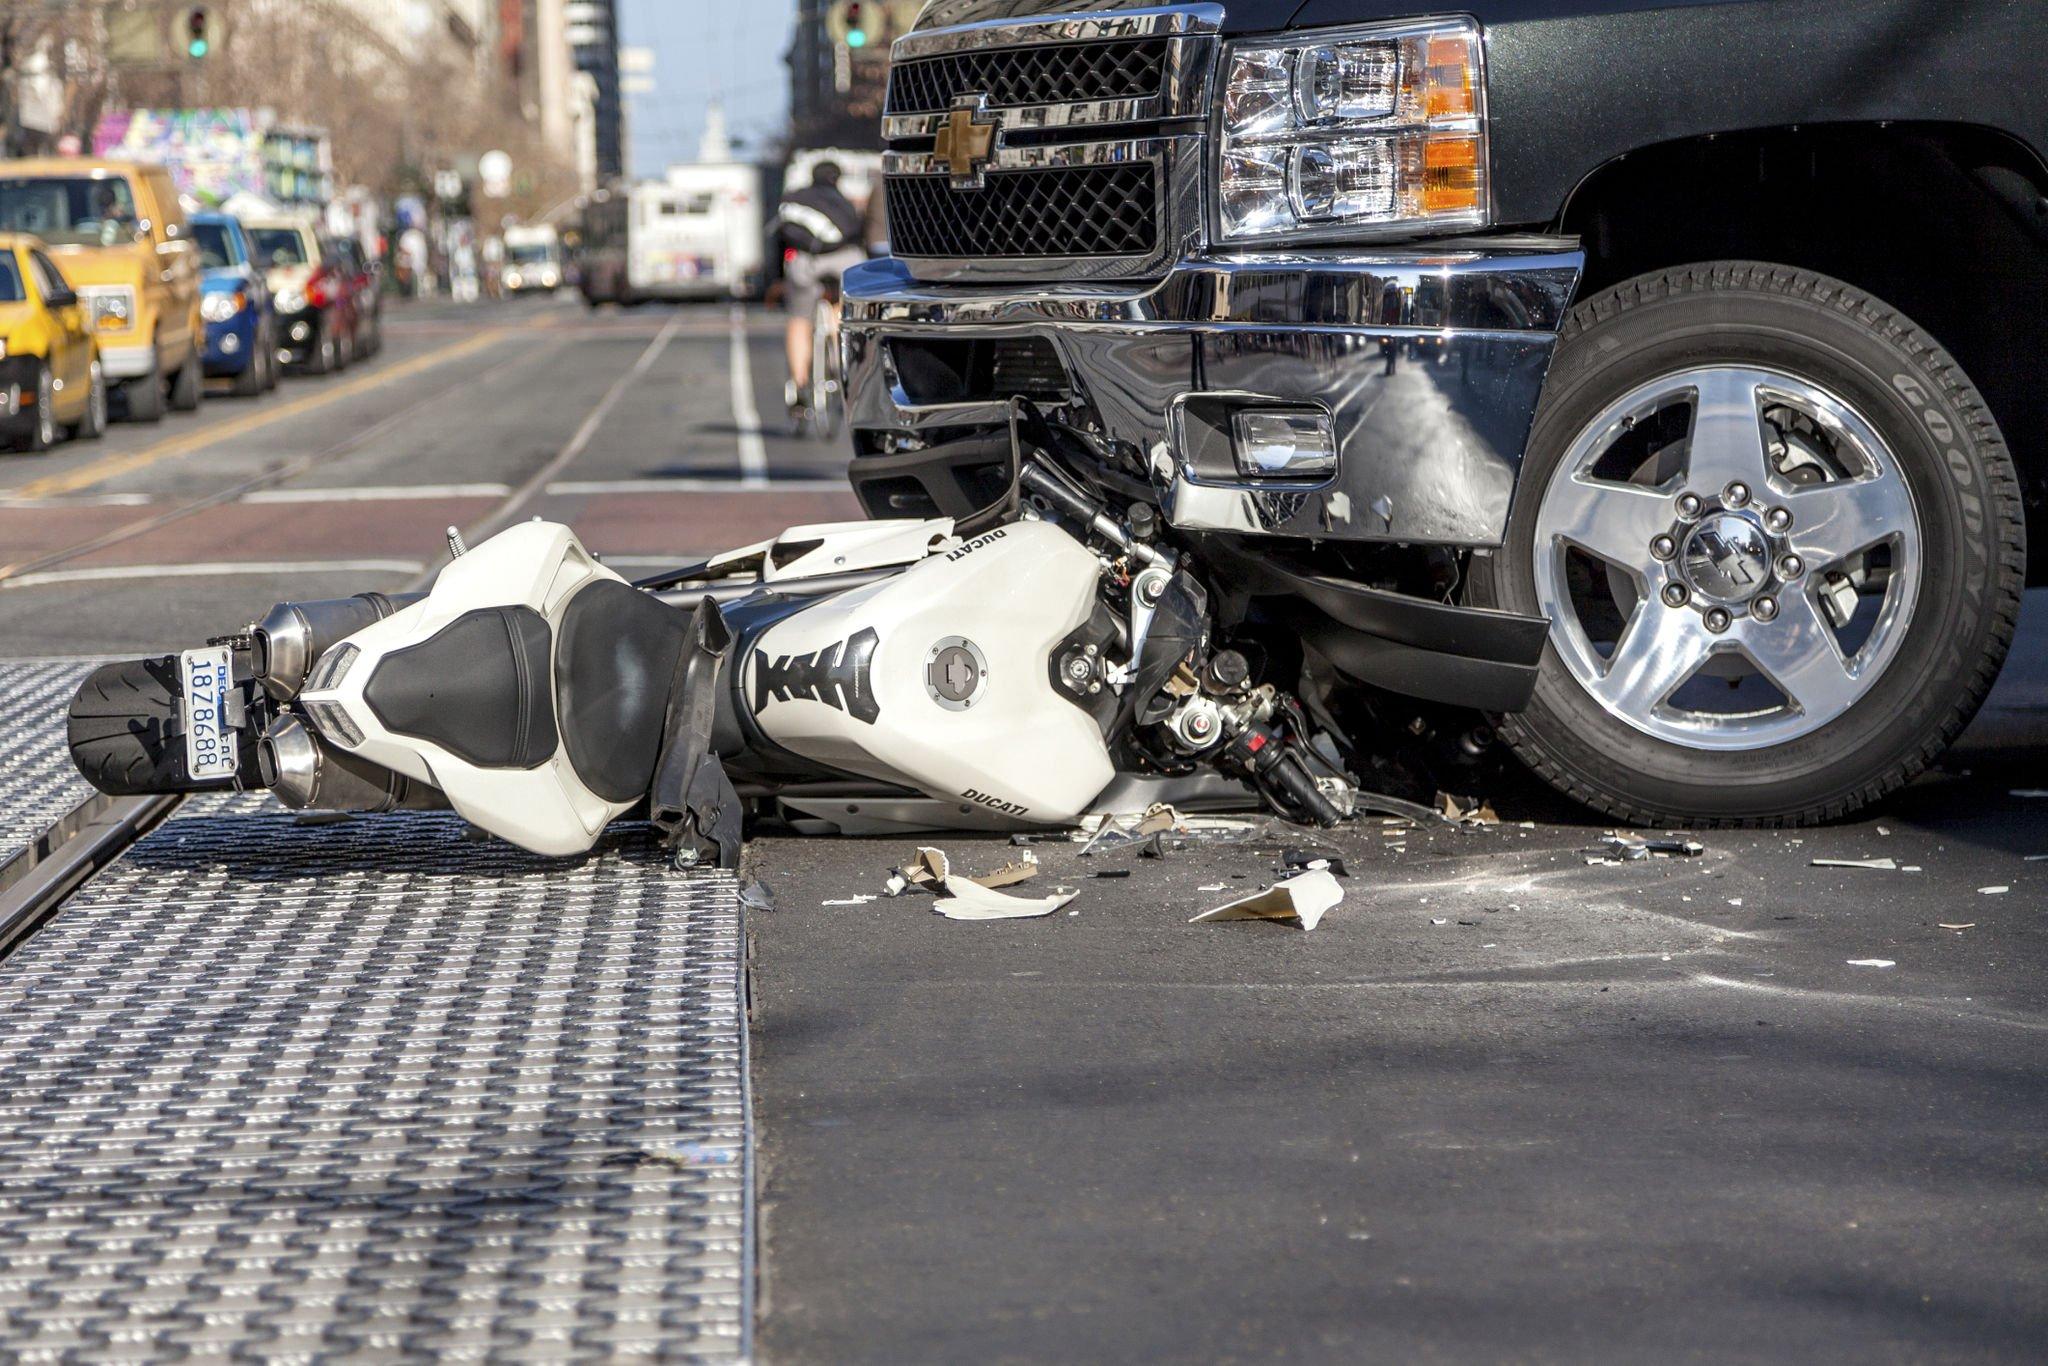 How to Check if Your Motorcycle is Rideable after a Crash